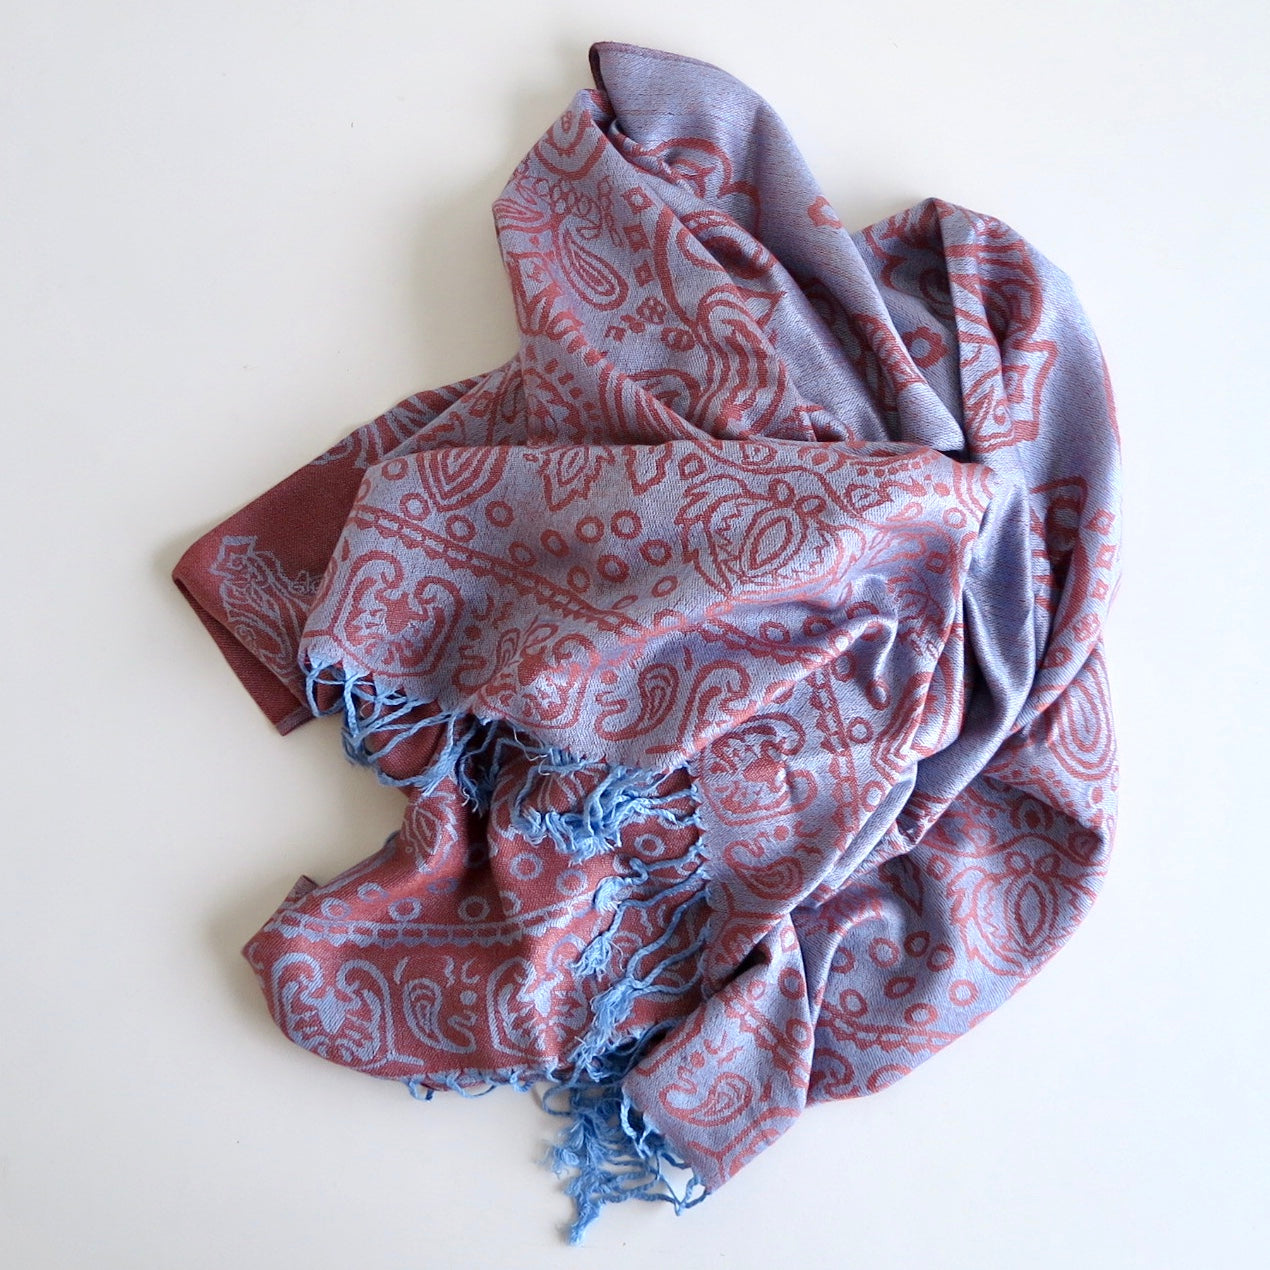 Lou Reversible Designer Inspired Scarf - Dusty Pink / Grey - Style Of Beyond